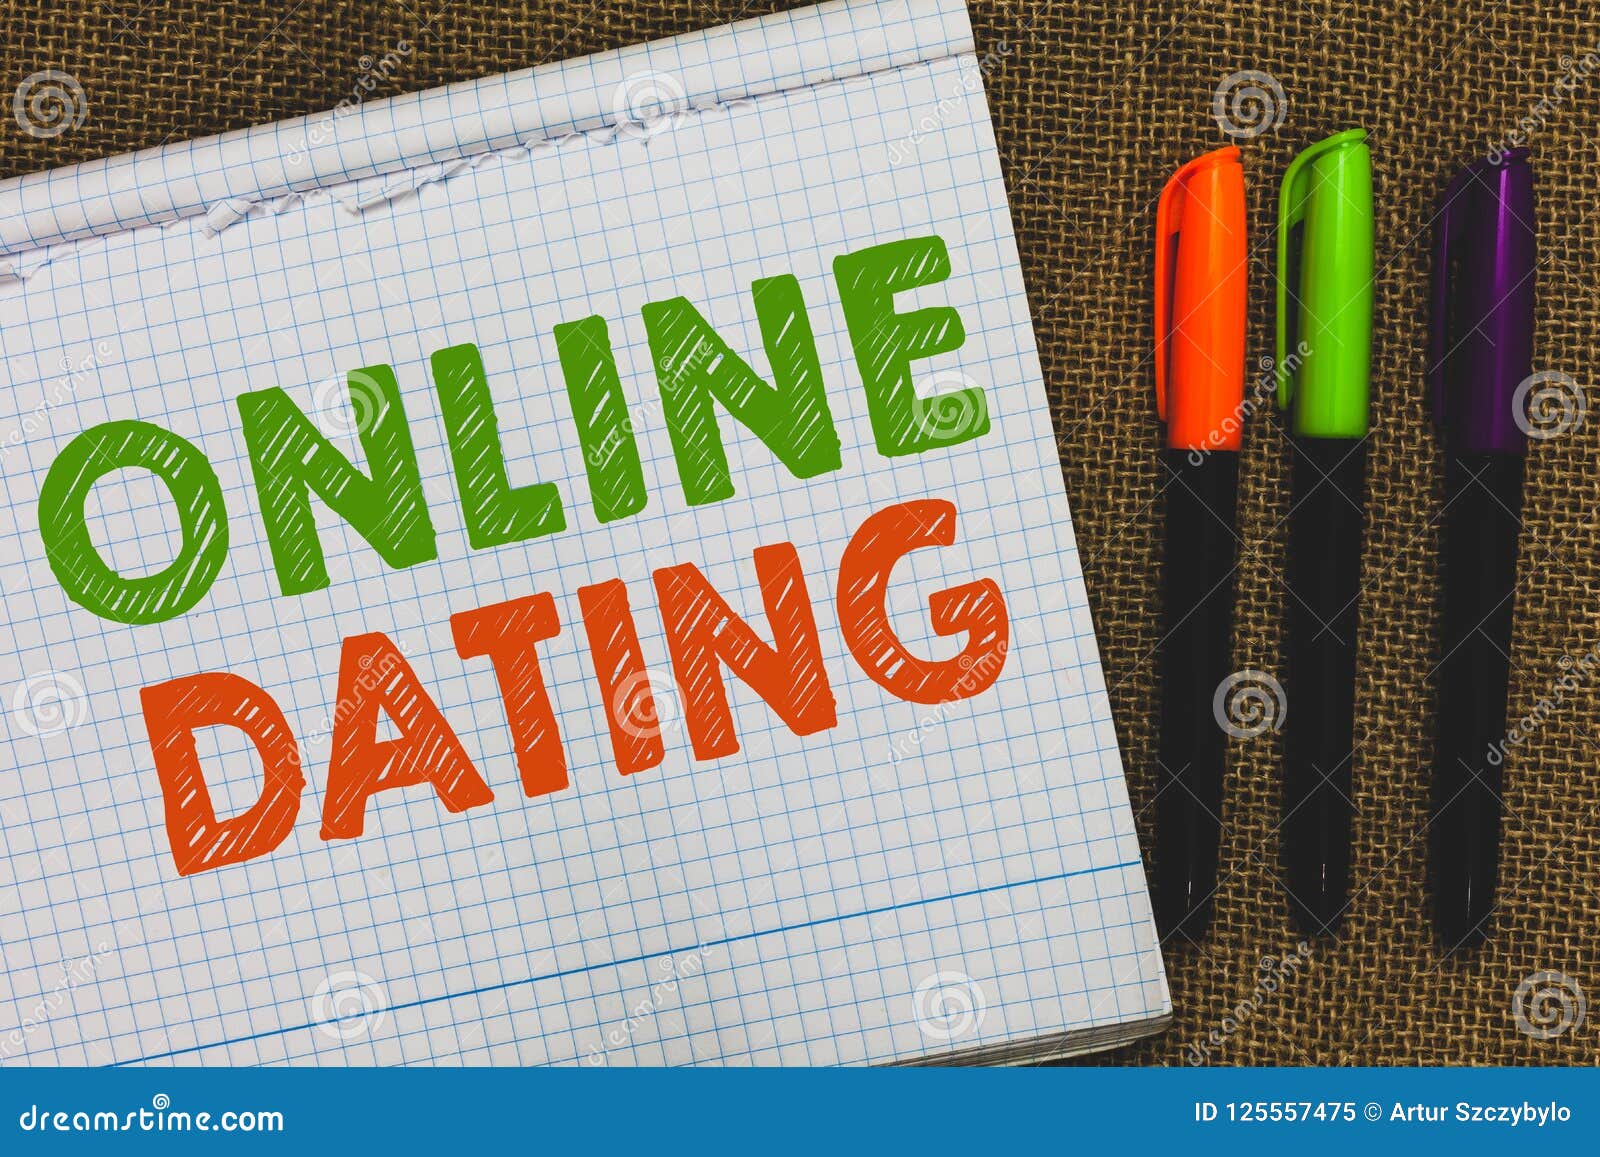 My Top 5 Online Dating Tips for Busy Professionals - We Just Clicked